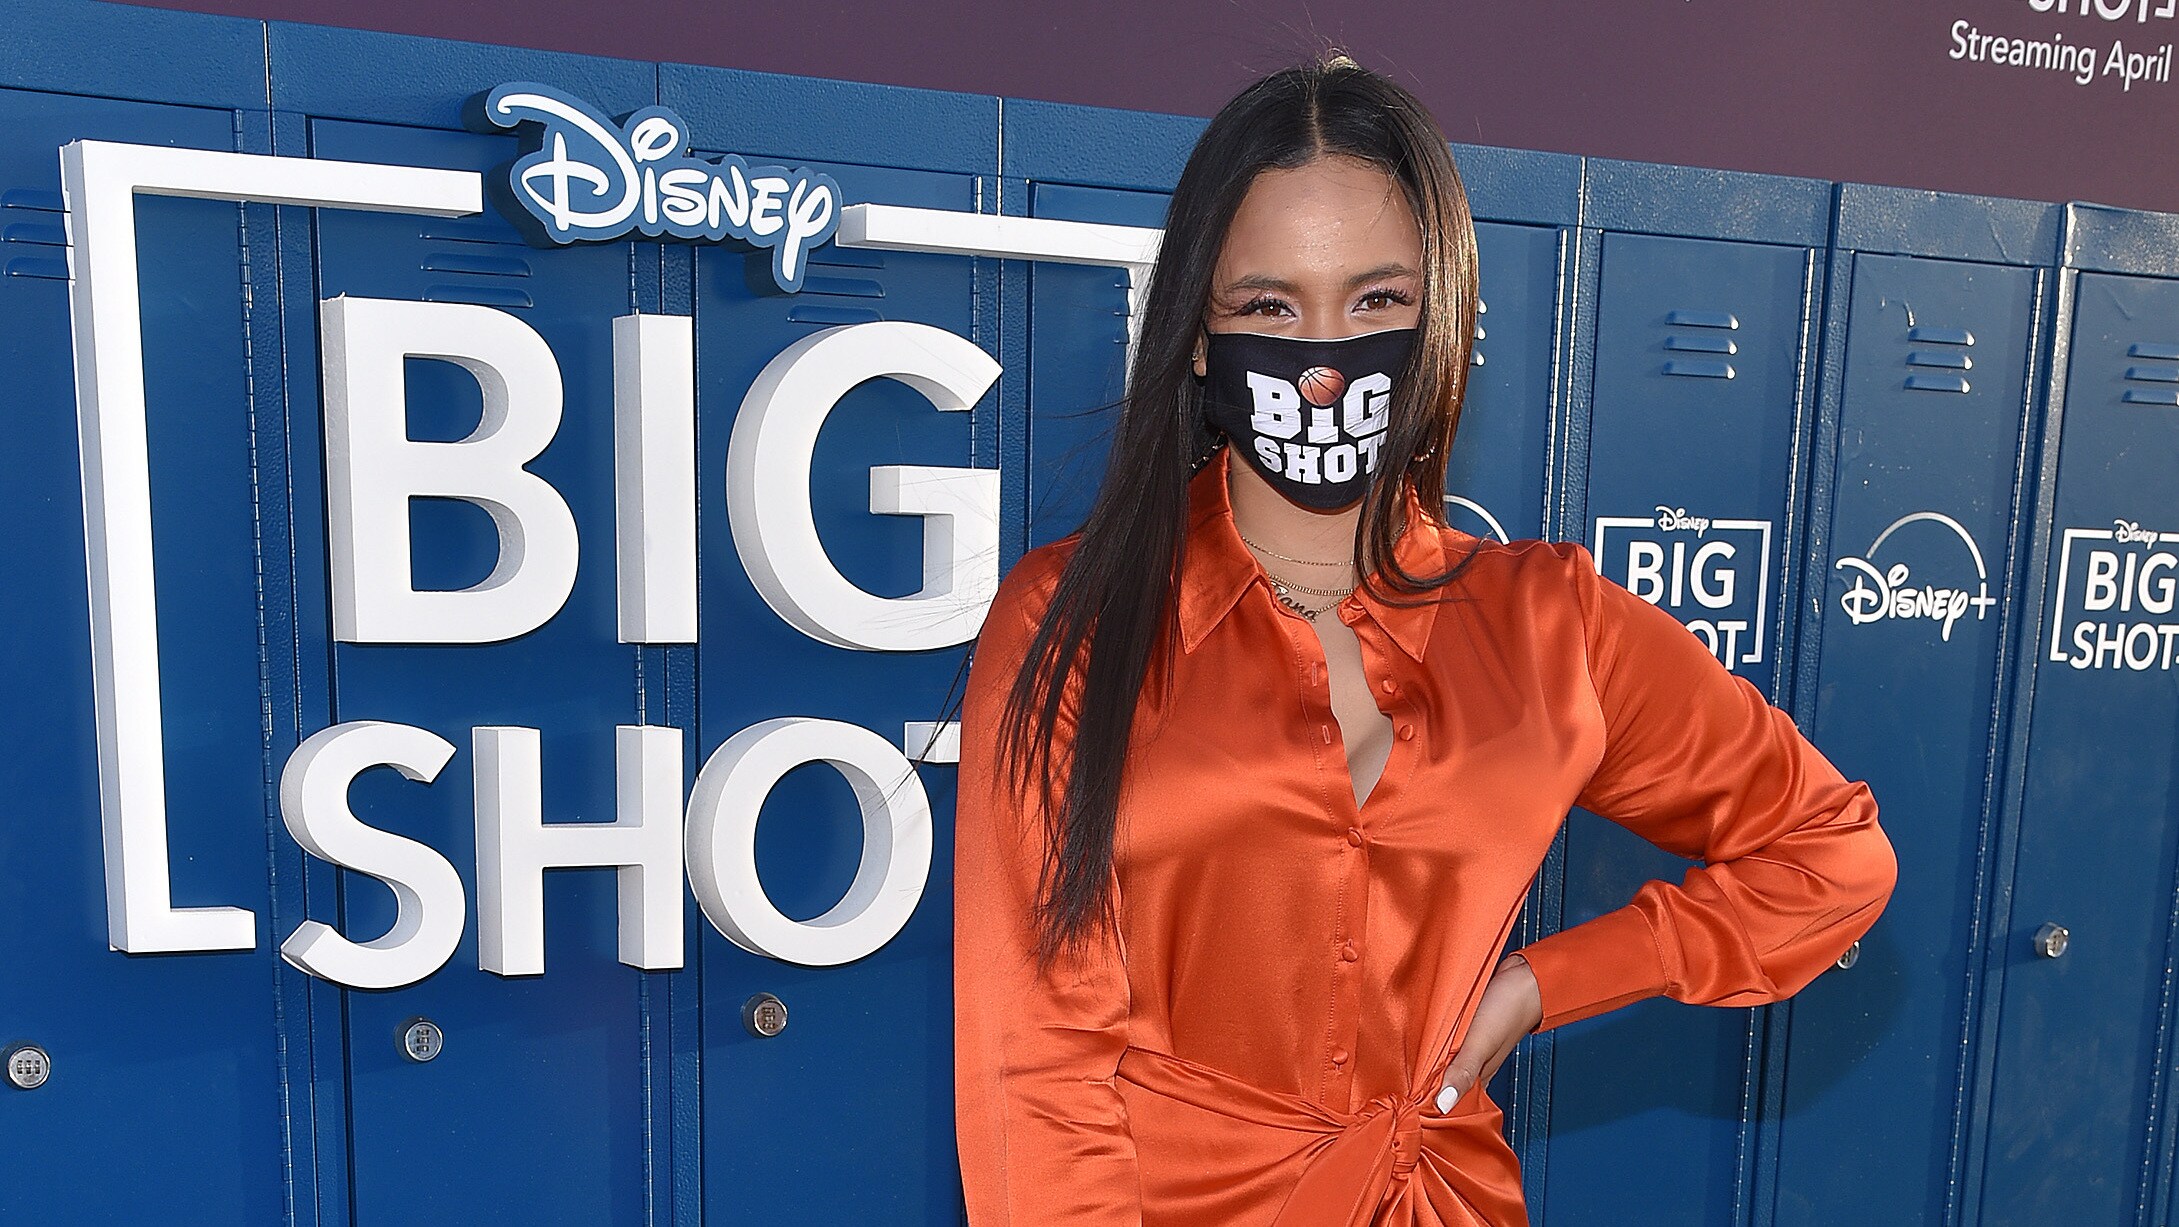 LOS ANGELES, CA - APRIL 14: Tiana Le attends the world premiere drive-in screening of the Disney + original series ìBIG SHOTî at The Grove in Los Angeles, California on April 14, 2021. (Photo by Stewart Cook/Disney +/PictureGroup)